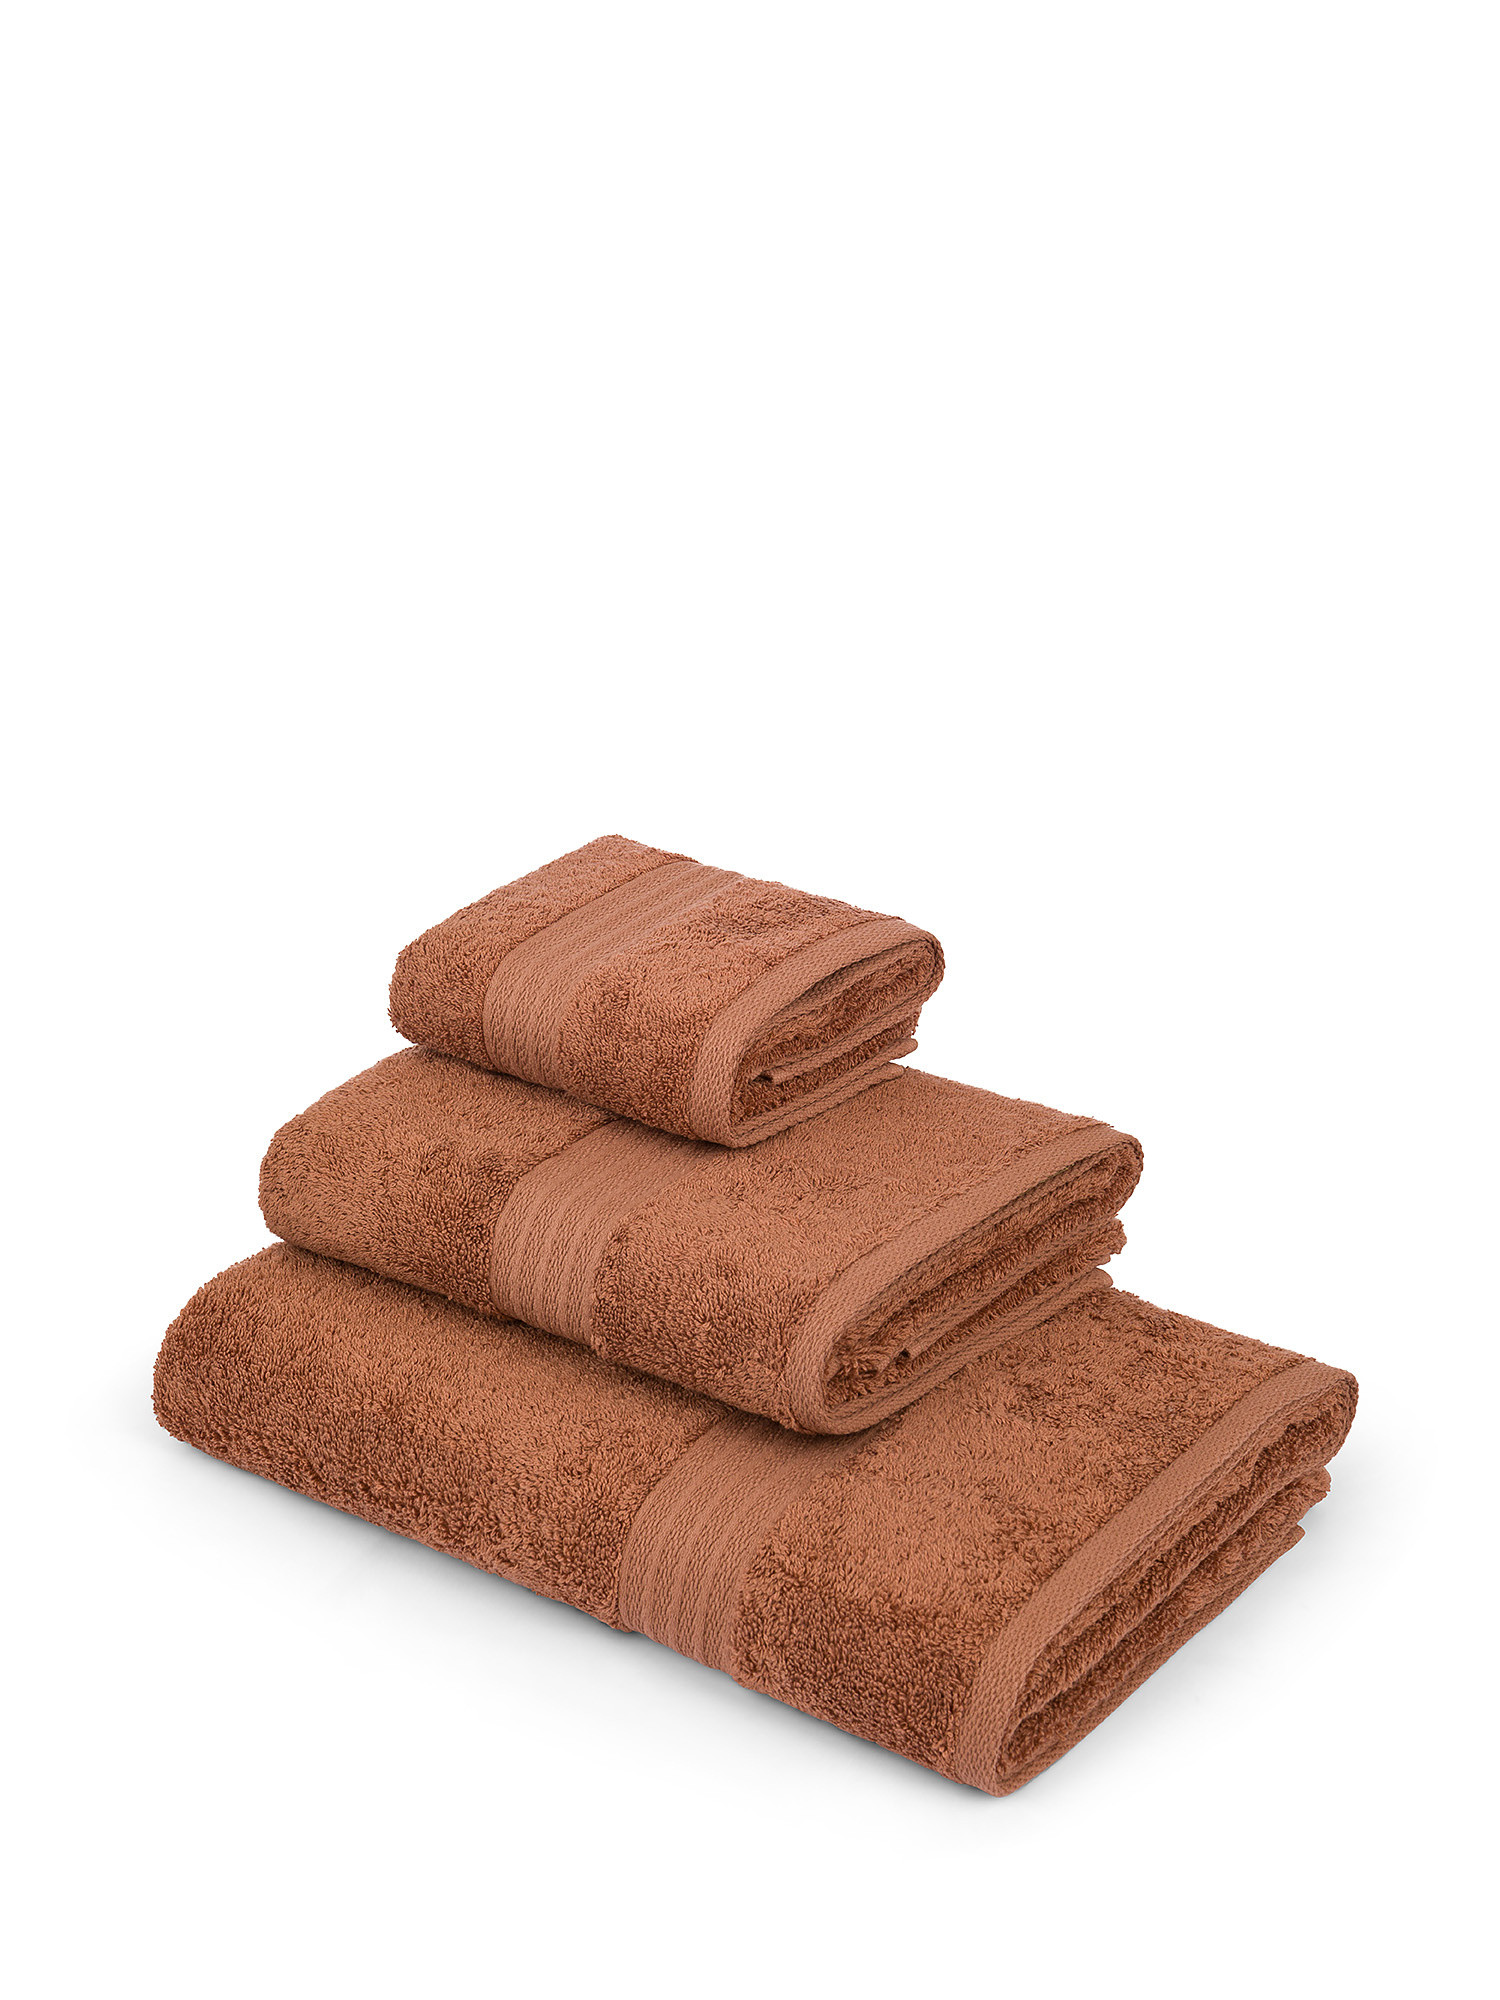 Zefiro solid color 100% cotton towel, Light Brown, large image number 0